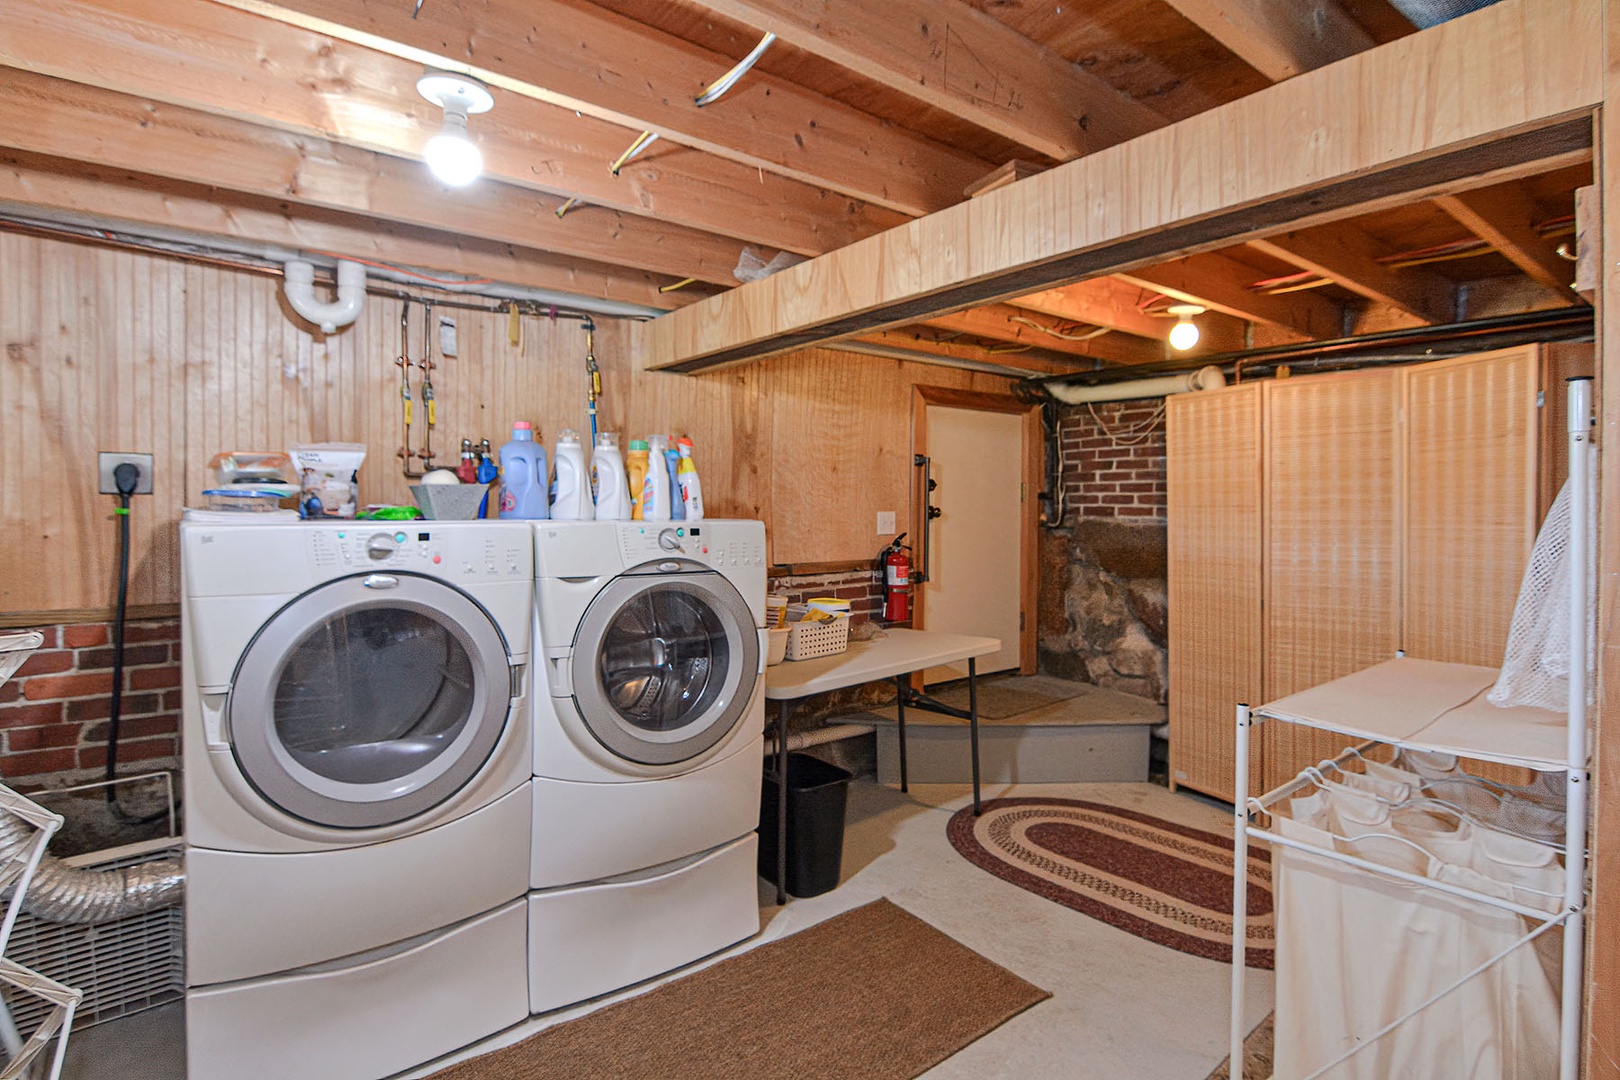 Basement laundry area and extra sink